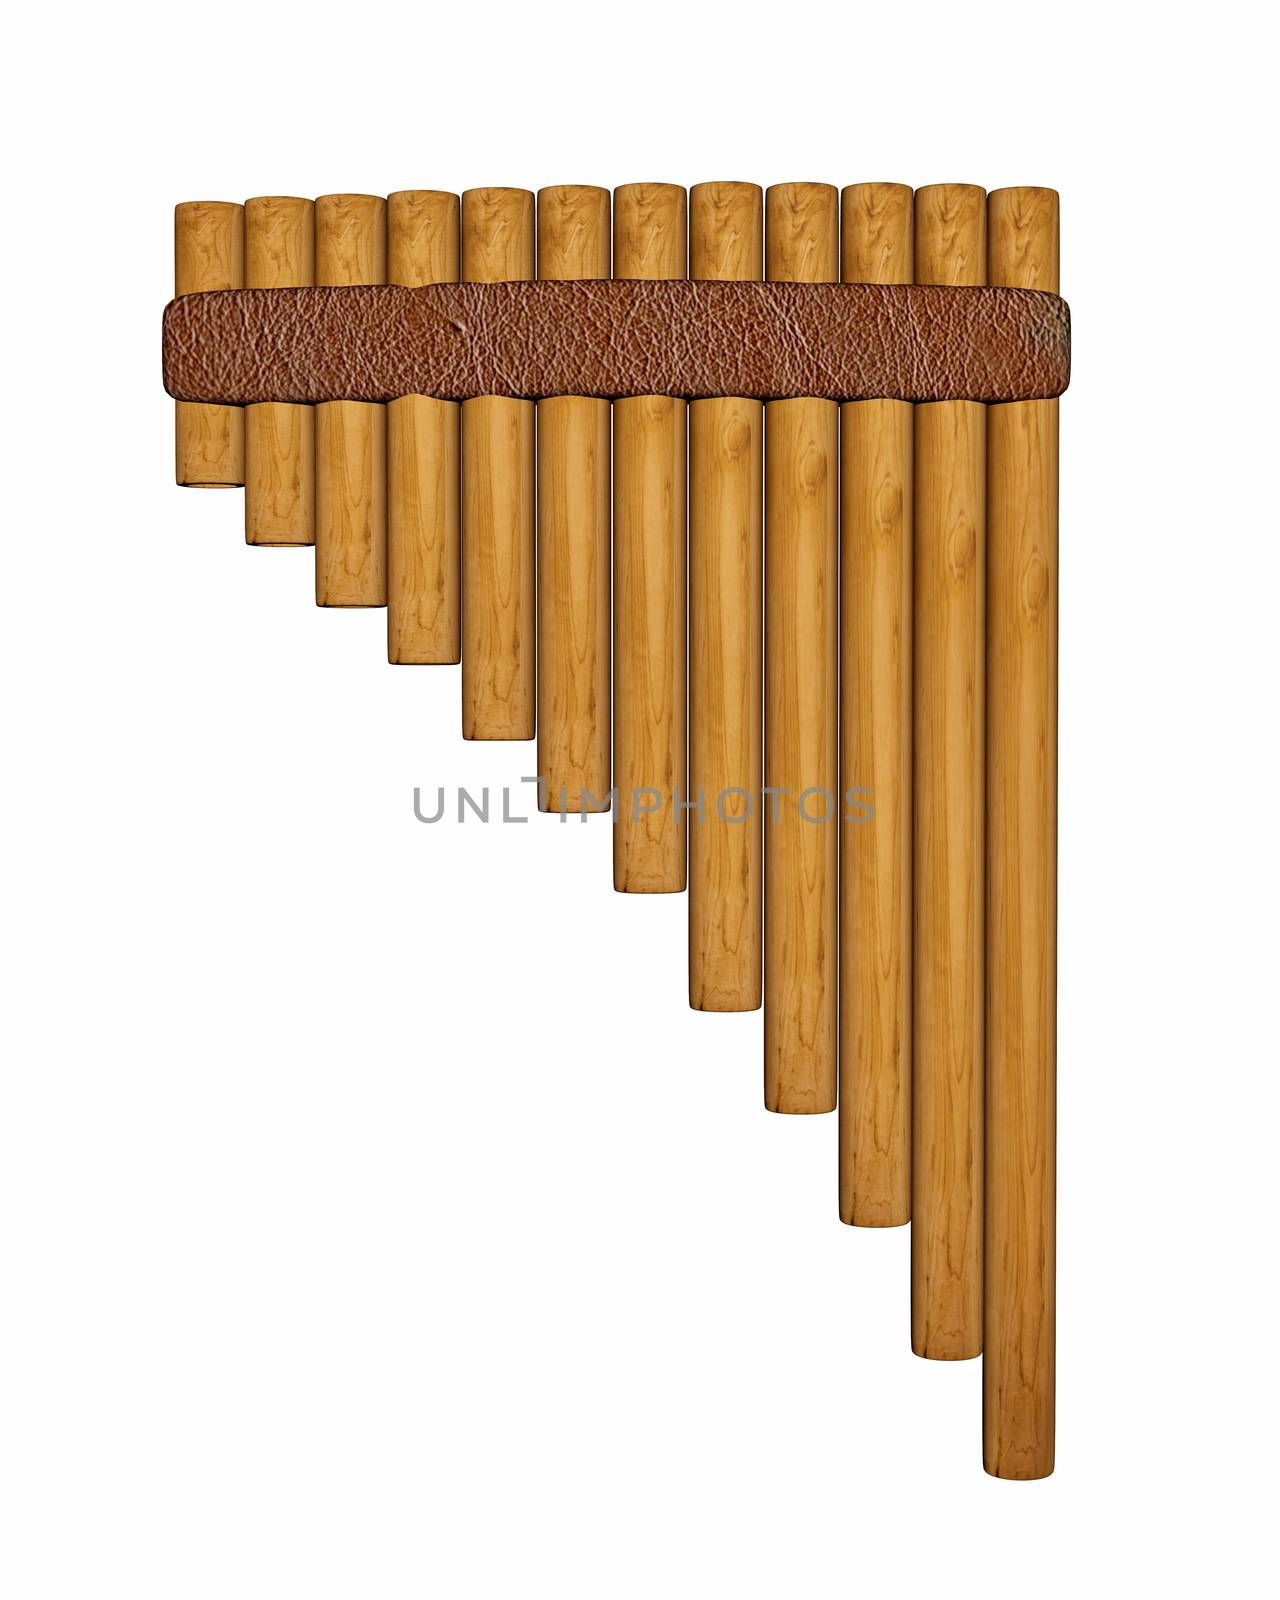 Pan flute or pipe isolated in white background